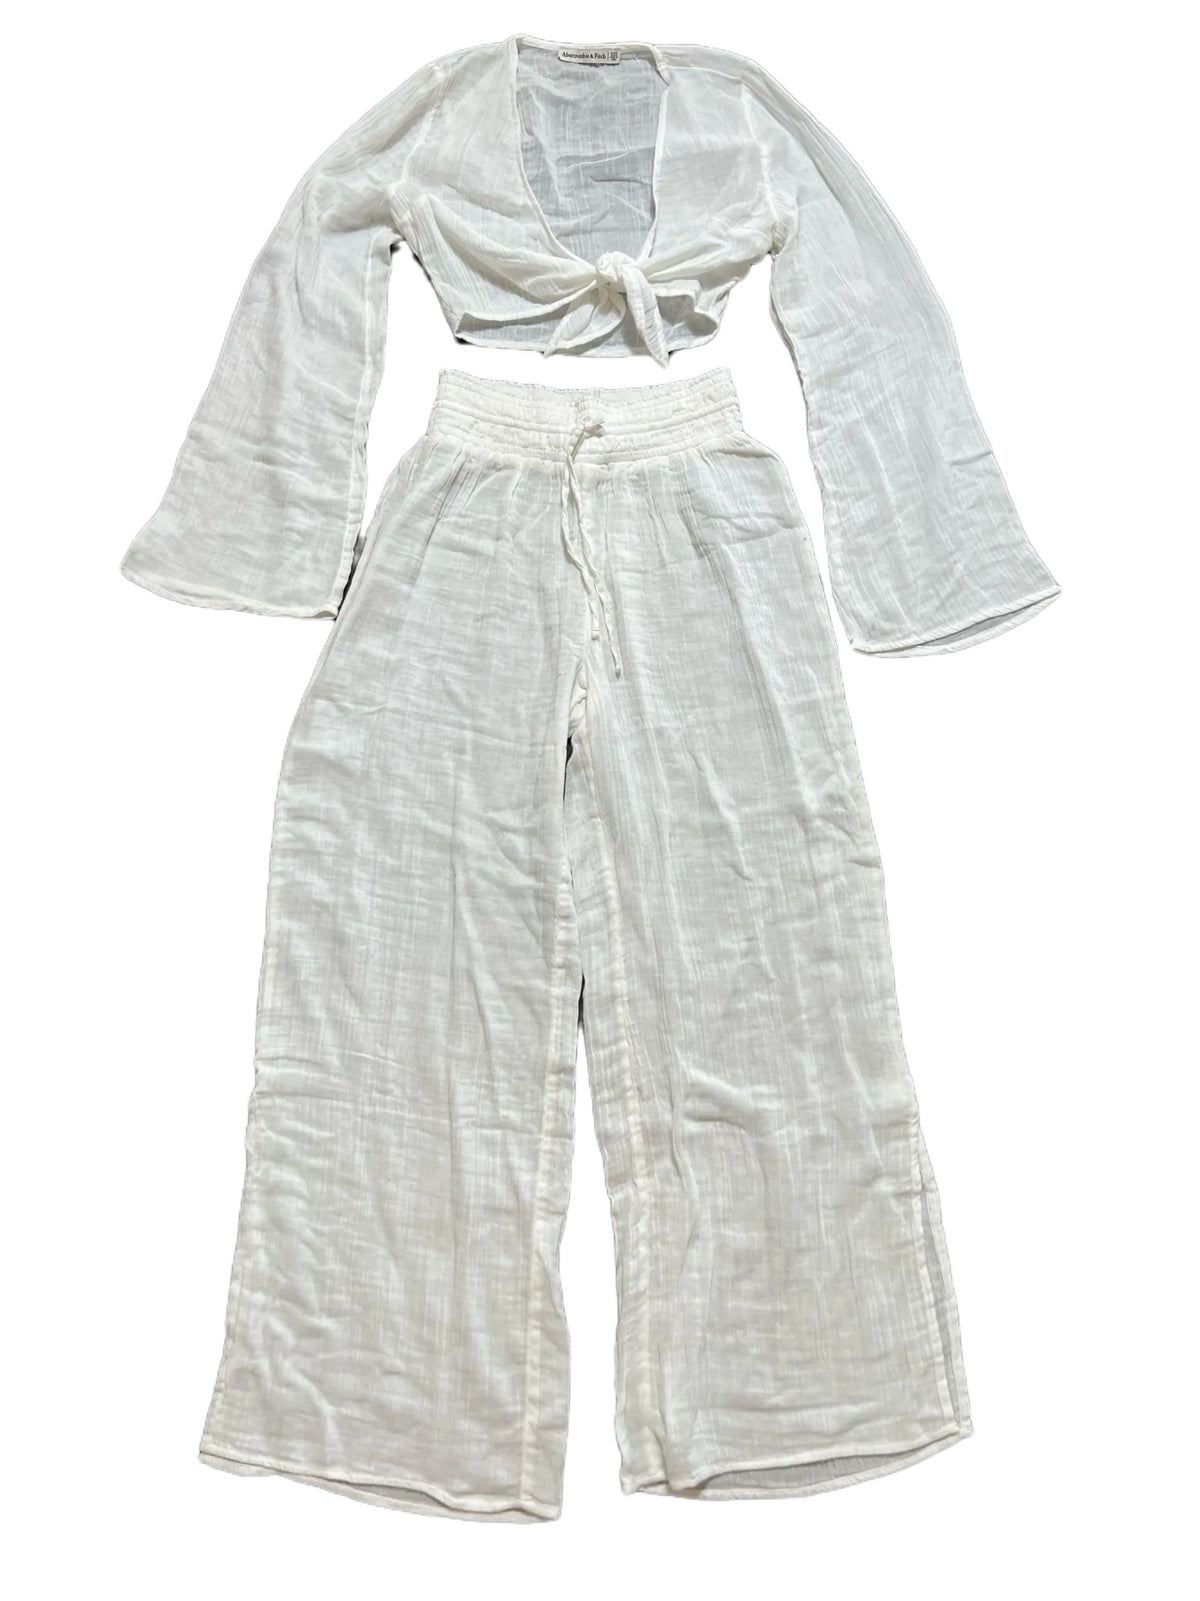 Abercrombie & Fitch- White Linen Matching Pant Set